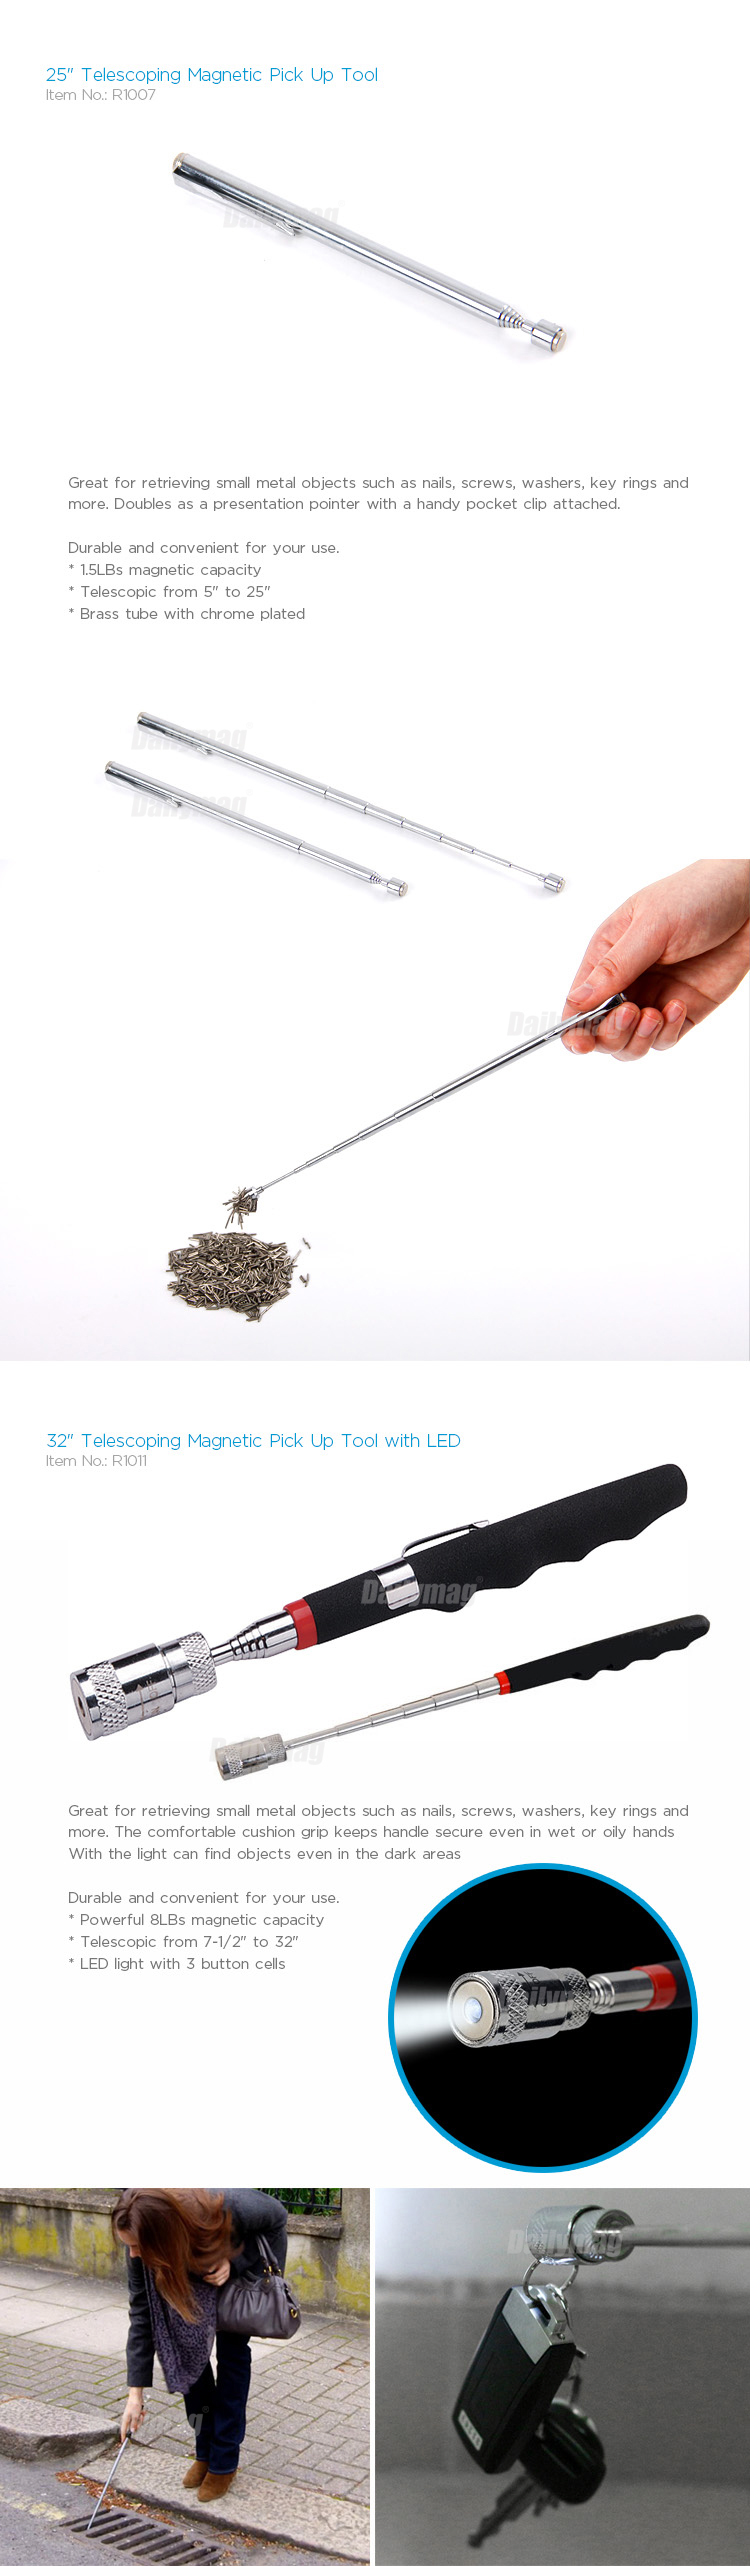 magnetic pick up tool,magnetic retrieving tool,magnetic pick up tools,magnetic retrieving tools